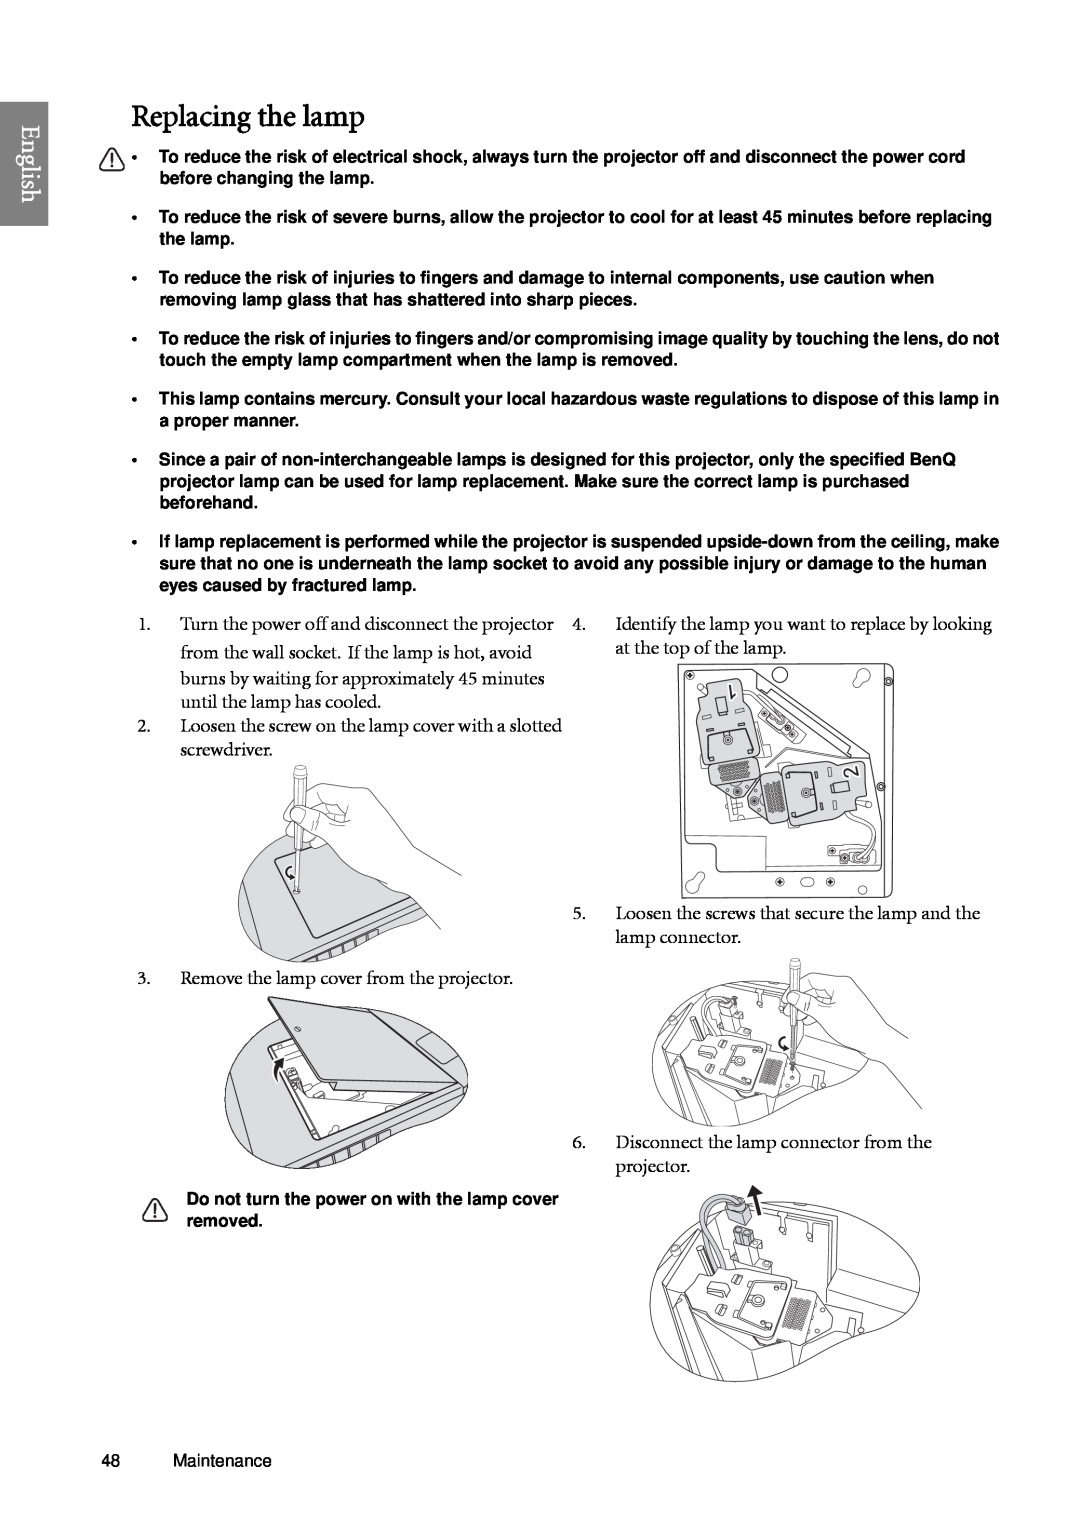 BenQ SP920 user manual Replacing the lamp, English, from the wall socket. If the lamp is hot, avoid, at the top of the lamp 